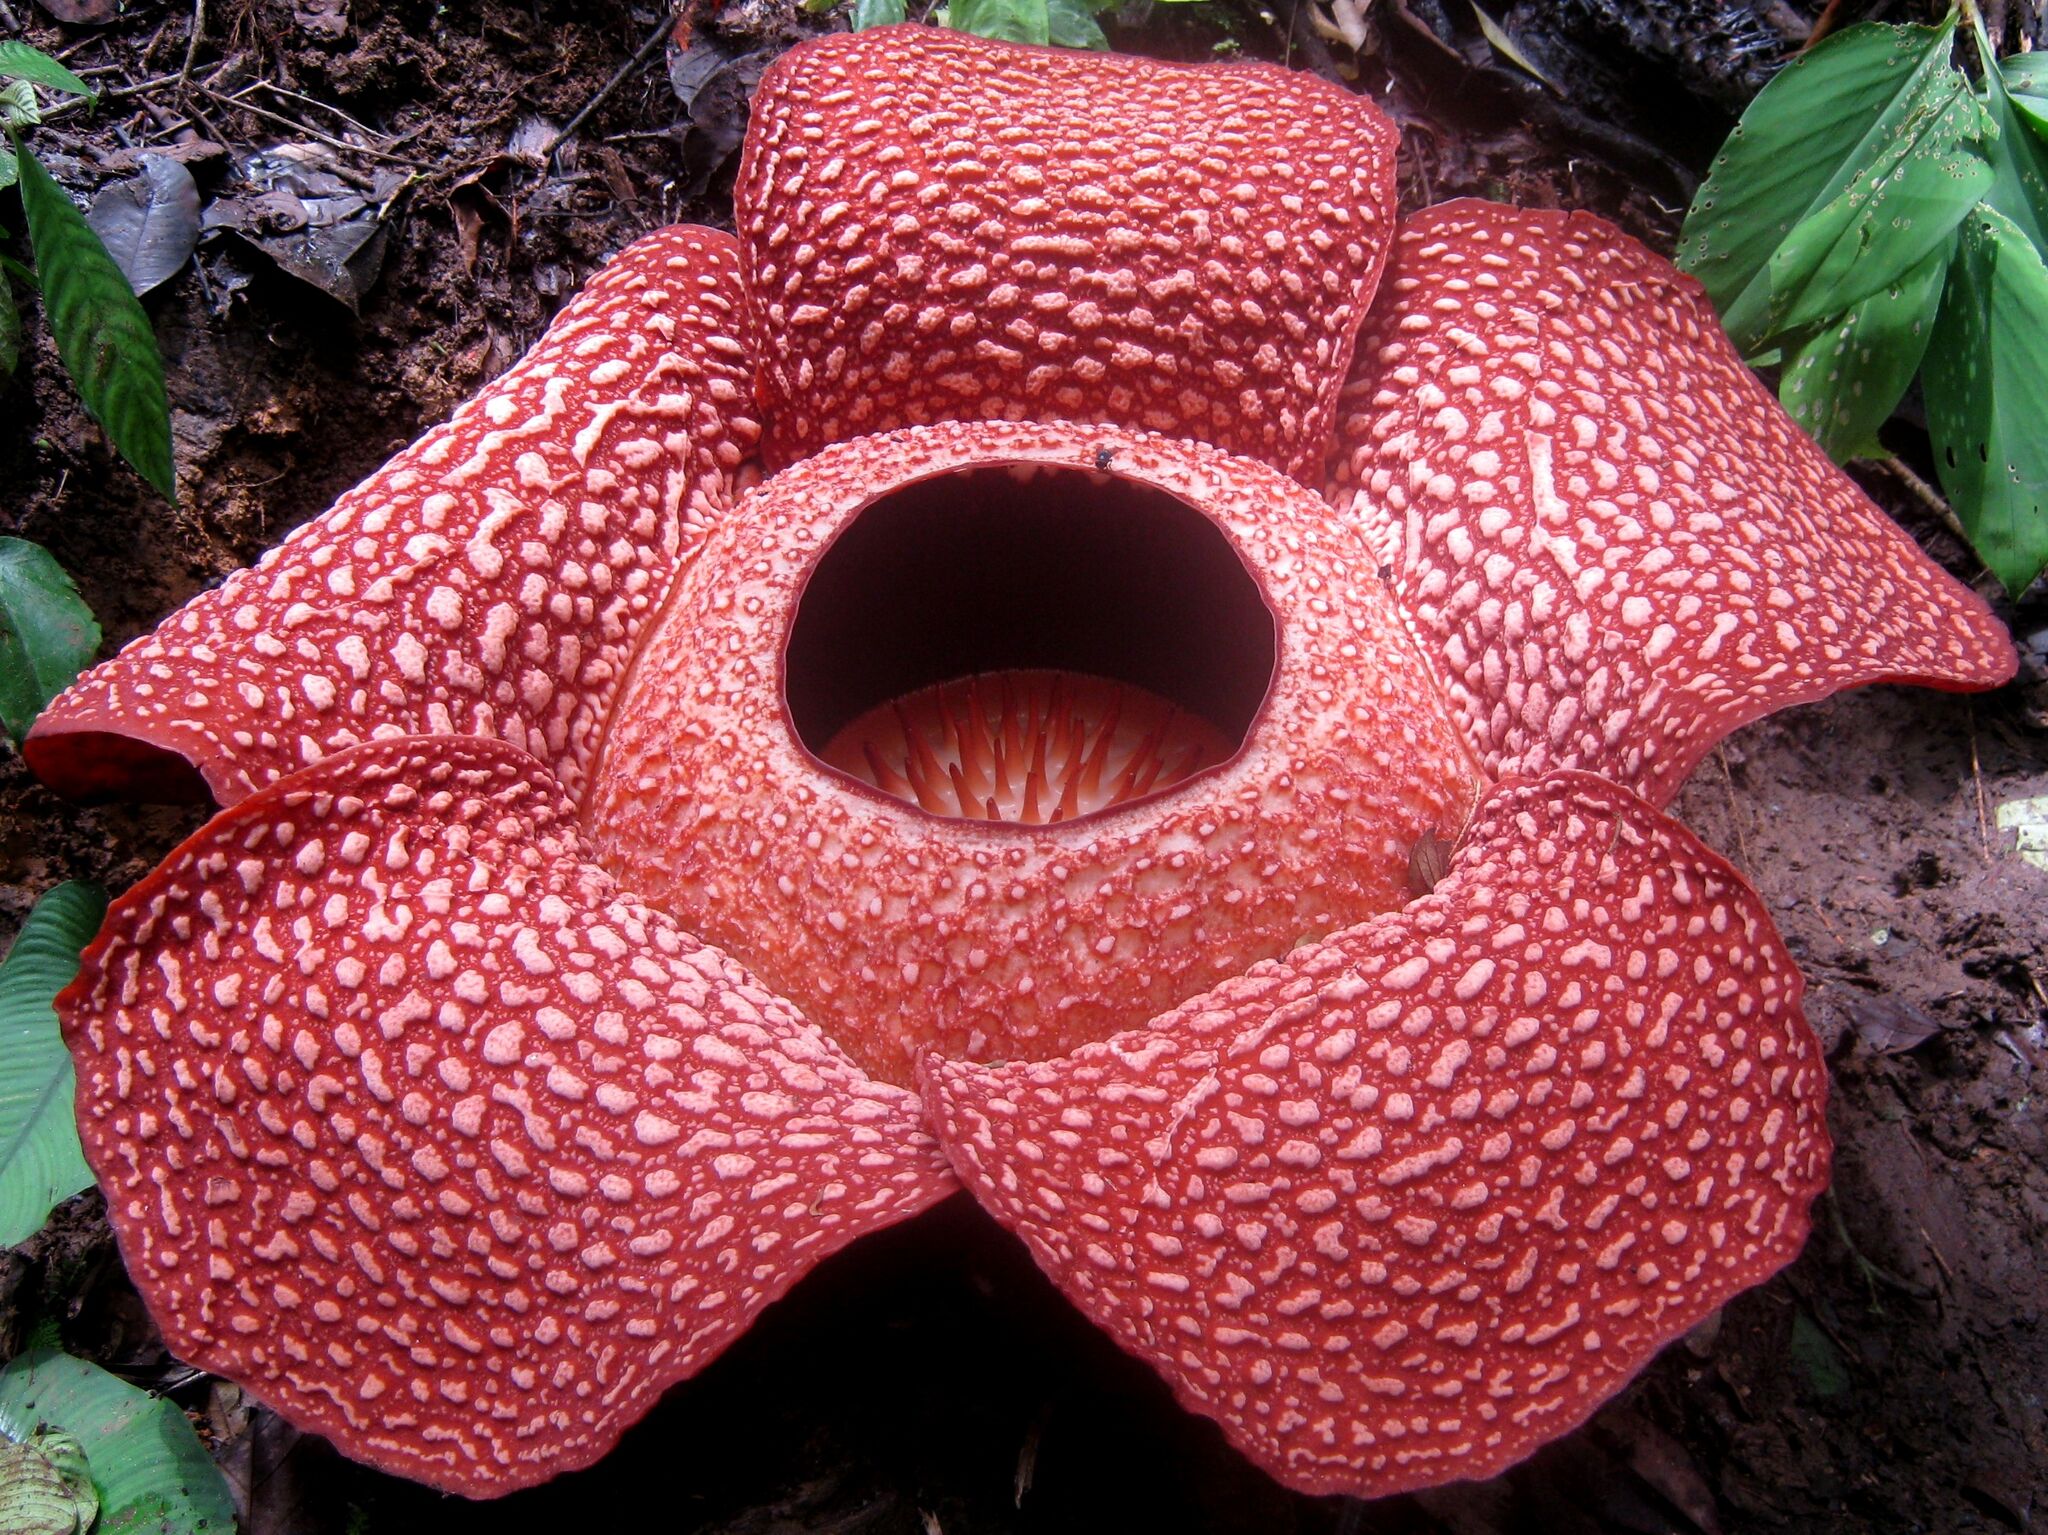 Roses Are Red Violets Are Blue Indonesia S Rafflesia Flower Is 5 Feet Tall And Smells Like Rotting Flesh Asiandate Blog